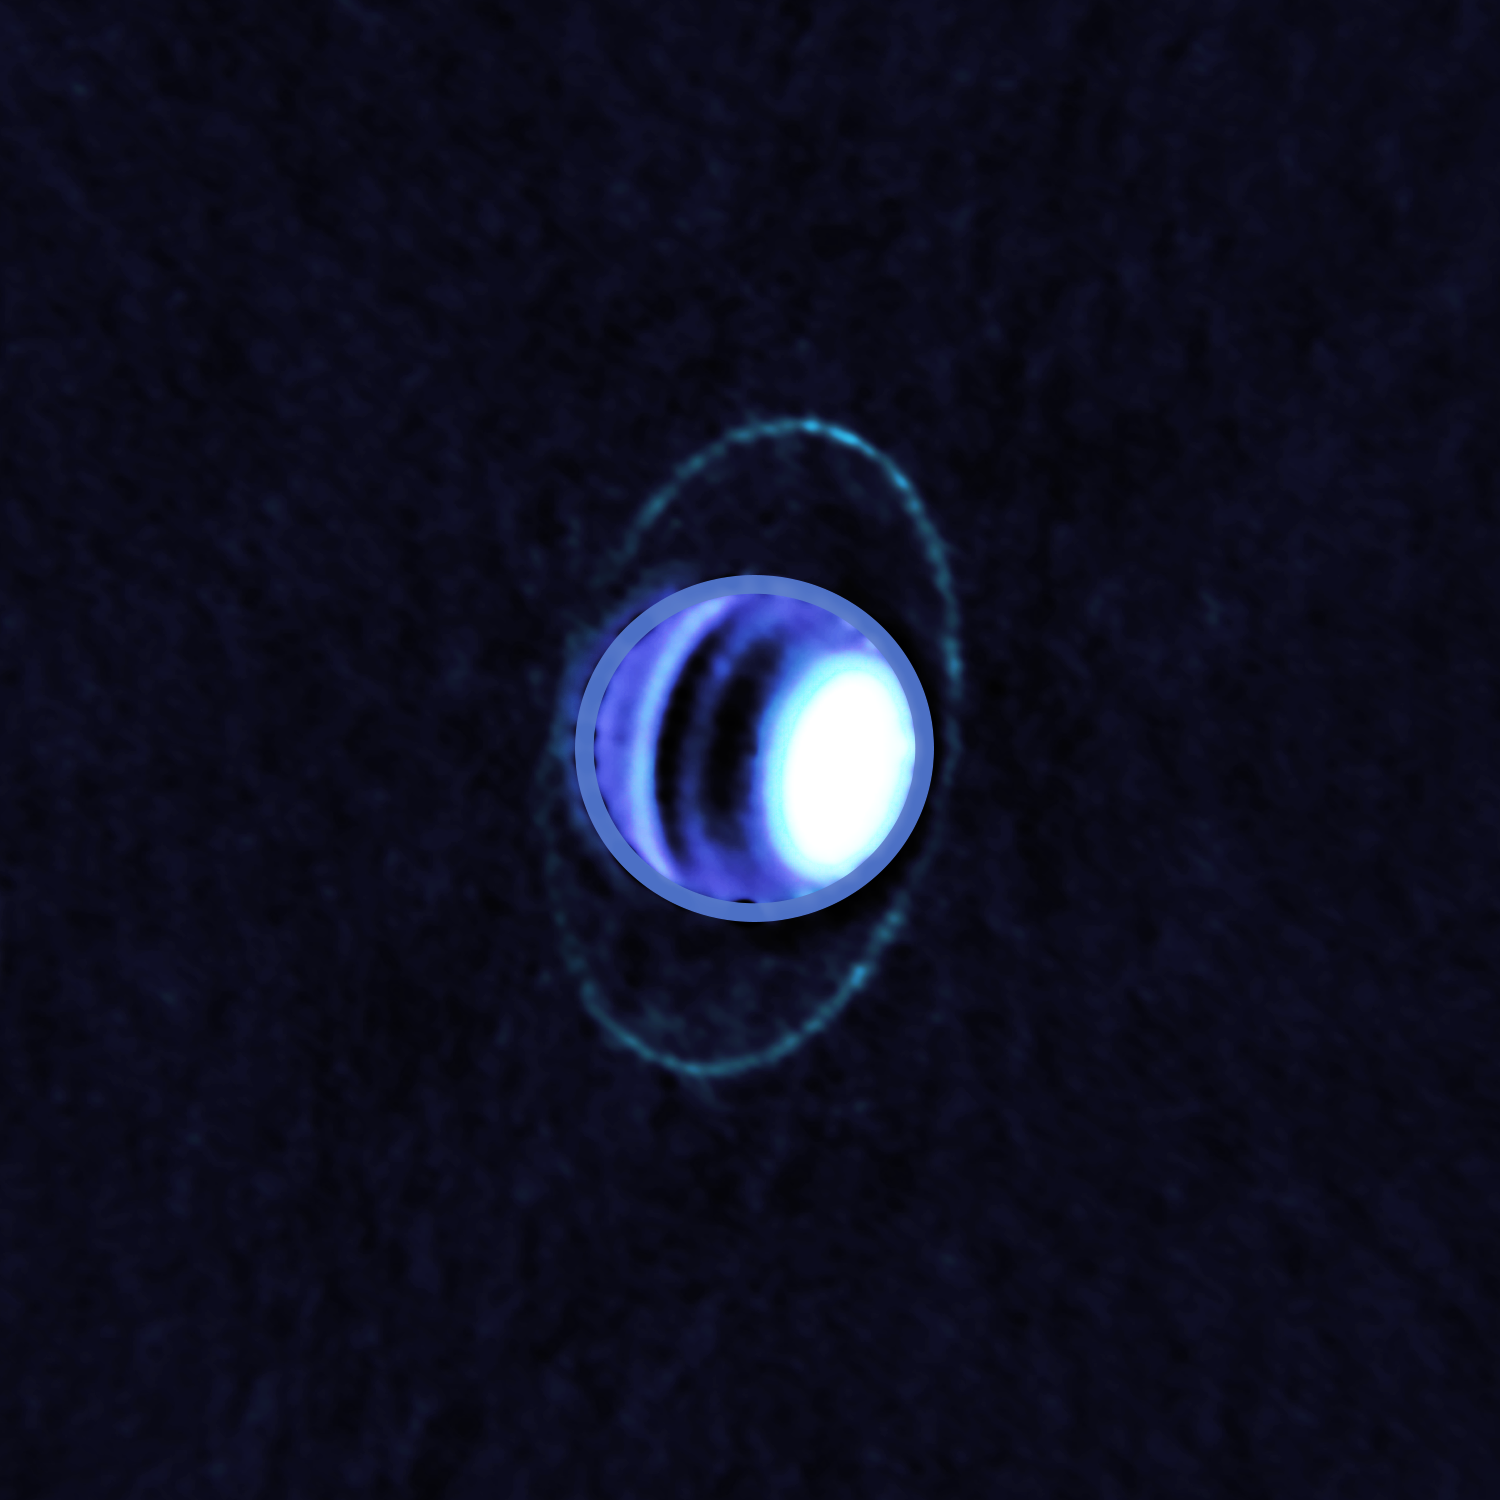 <p>Composite image of Uranus’s atmosphere and rings at radio wavelengths, taken with the Atacama Large Millimeter/submillimeter Array (ALMA) in December 2017. The image shows thermal emission, or heat, from the rings of Uranus for the first time, enabling scientists to determine their temperature is a frigid 77 K (-320 F). Dark bands in Uranus’s atmosphere at these wavelengths show the presence of radiolight-absorbing molecules, in particular hydrogen sulfide (H2S) gas, whereas bright regions like the north polar spot contain very few of these molecules. Credit: ALMA (ESO/NAOJ/NRAO); E. Molter and I. de Pater.</p>
